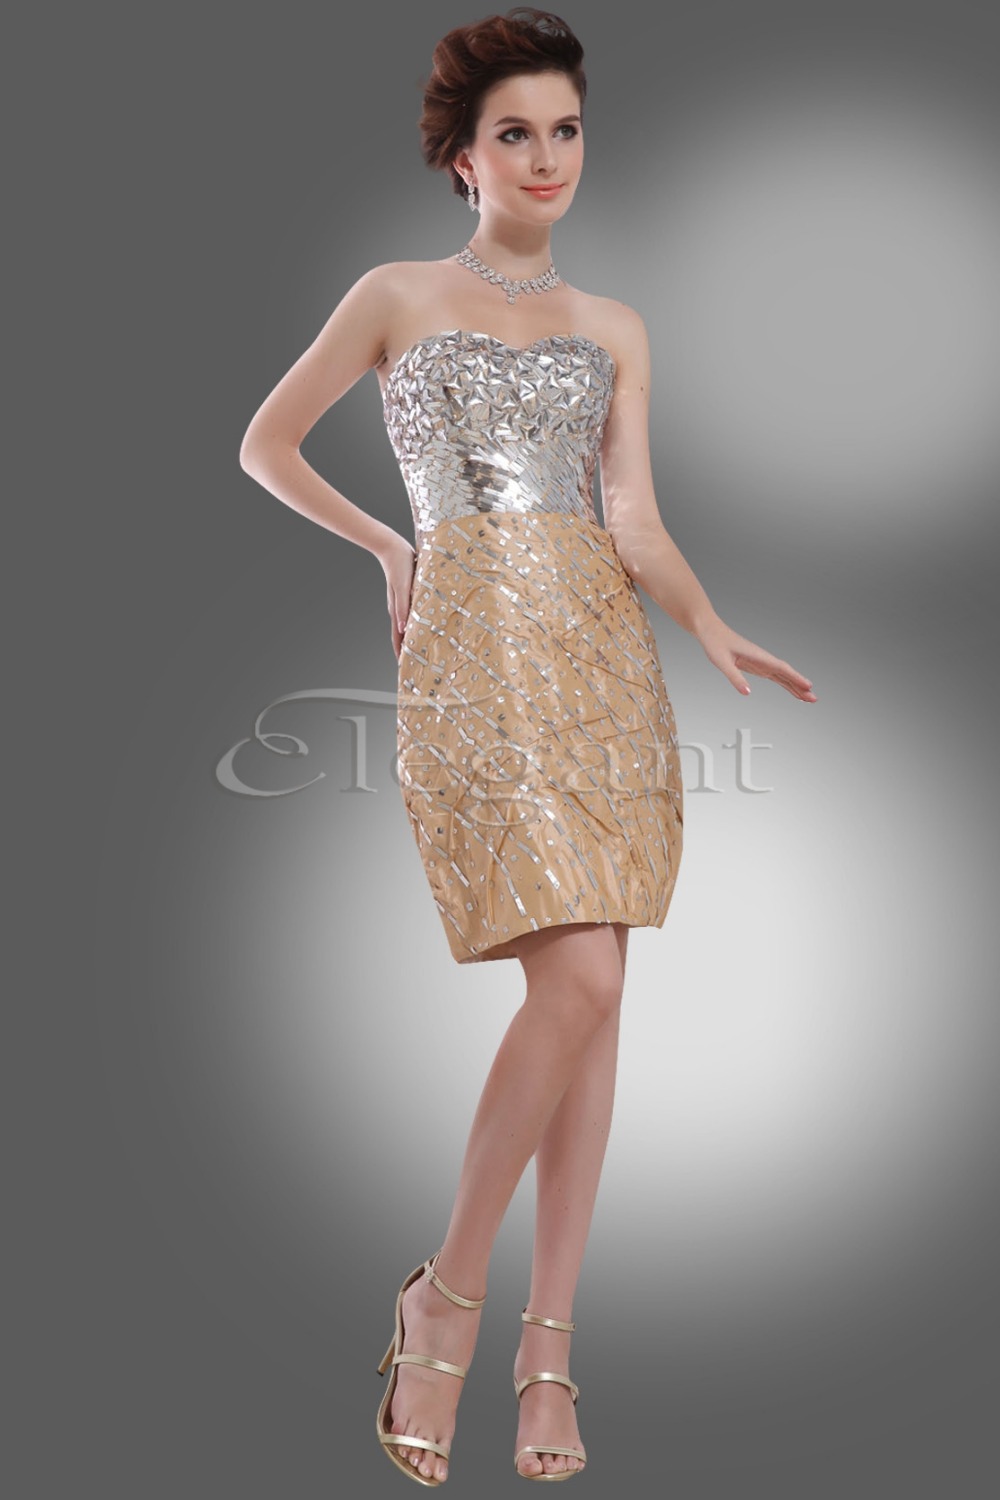 ... -Sequined-Sheath-Knee-Length-Silver-and-Gold-Cocktail-Dress-3155.jpg